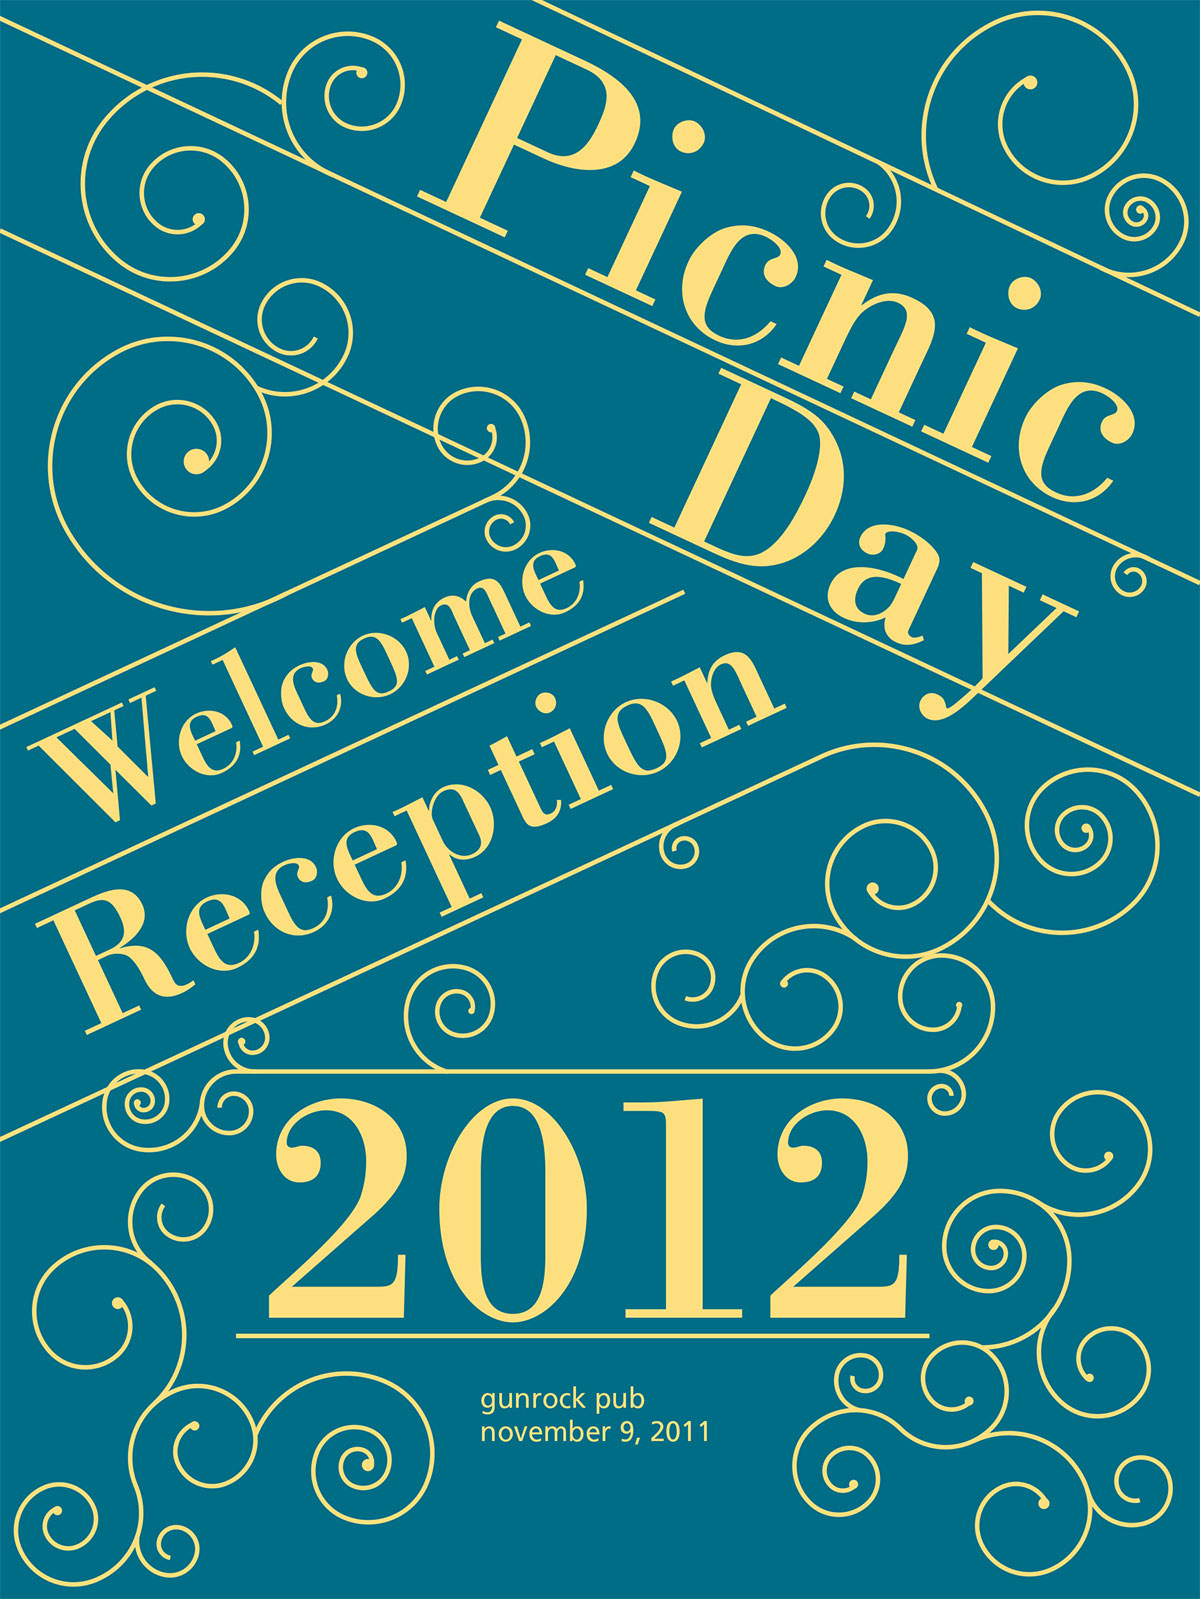 Picnic Day Welcome Reception Poster